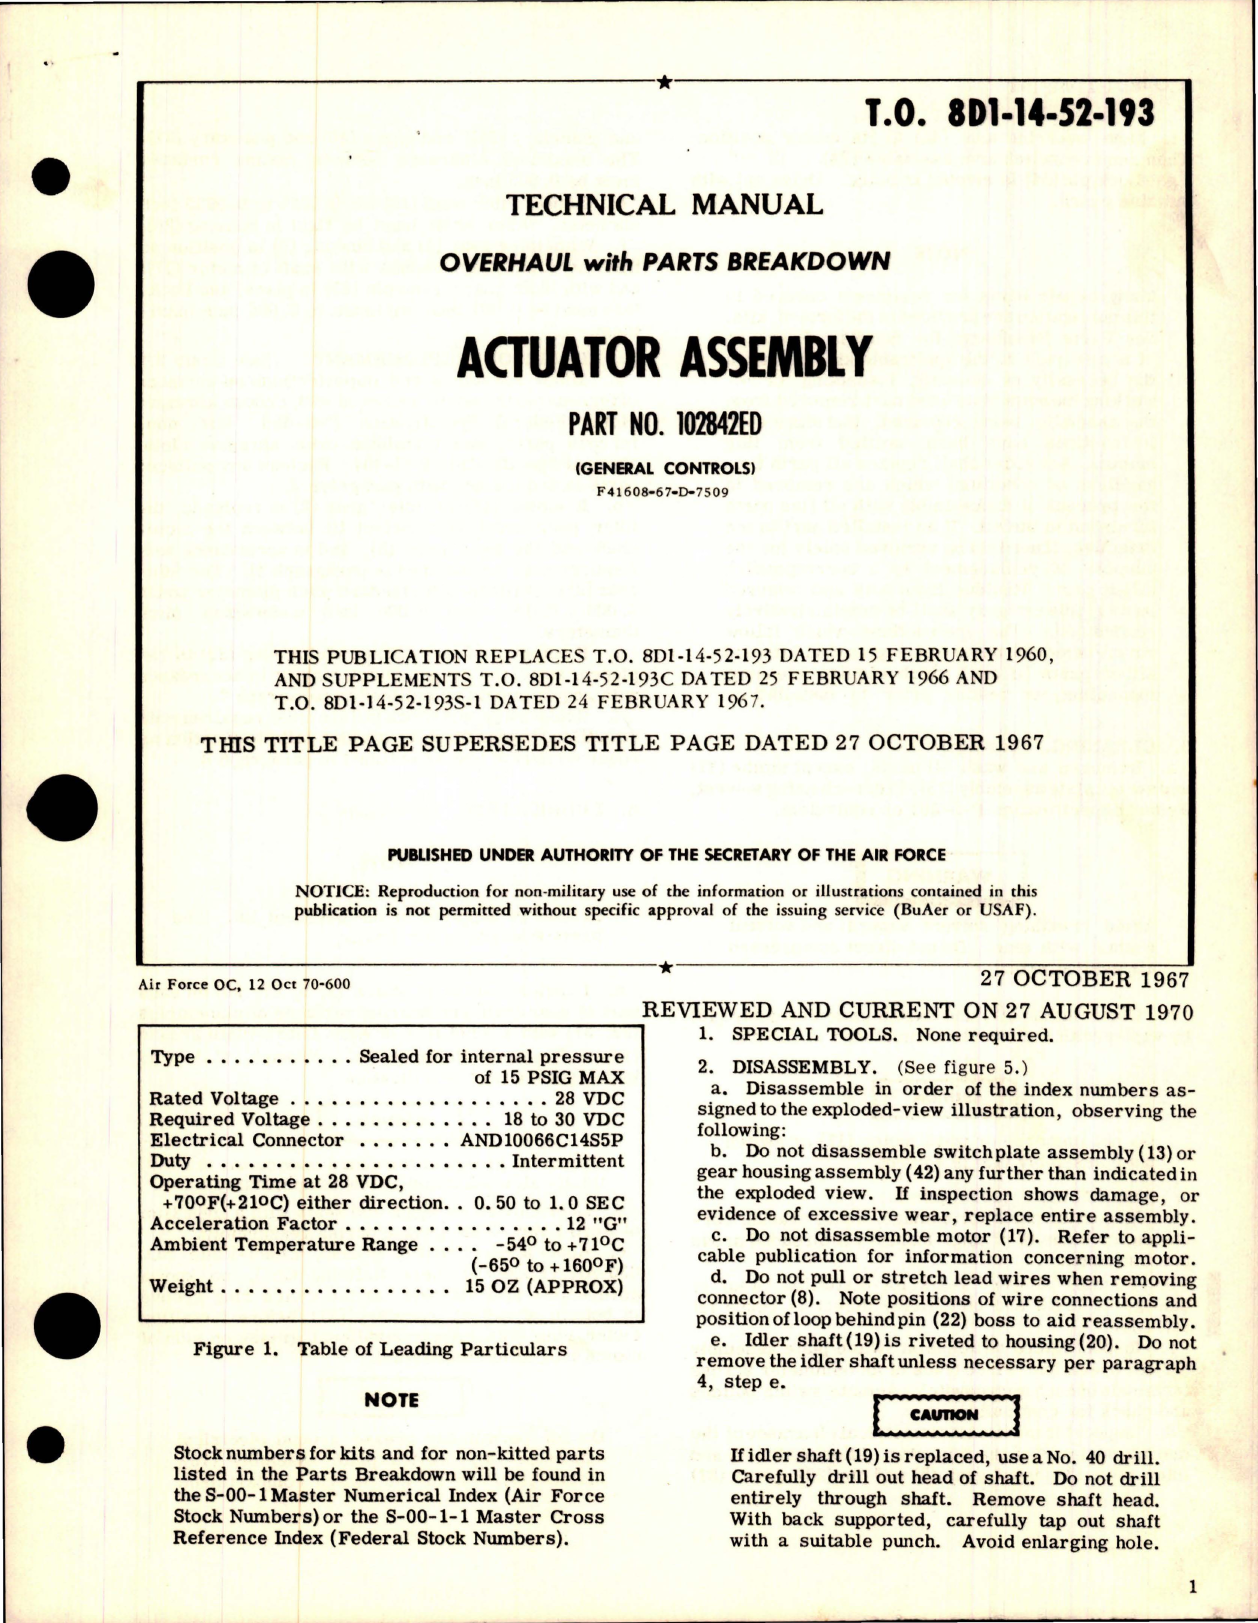 Sample page 1 from AirCorps Library document: Overhaul with Parts Breakdown for Actuator Assembly - Part 102842ED 